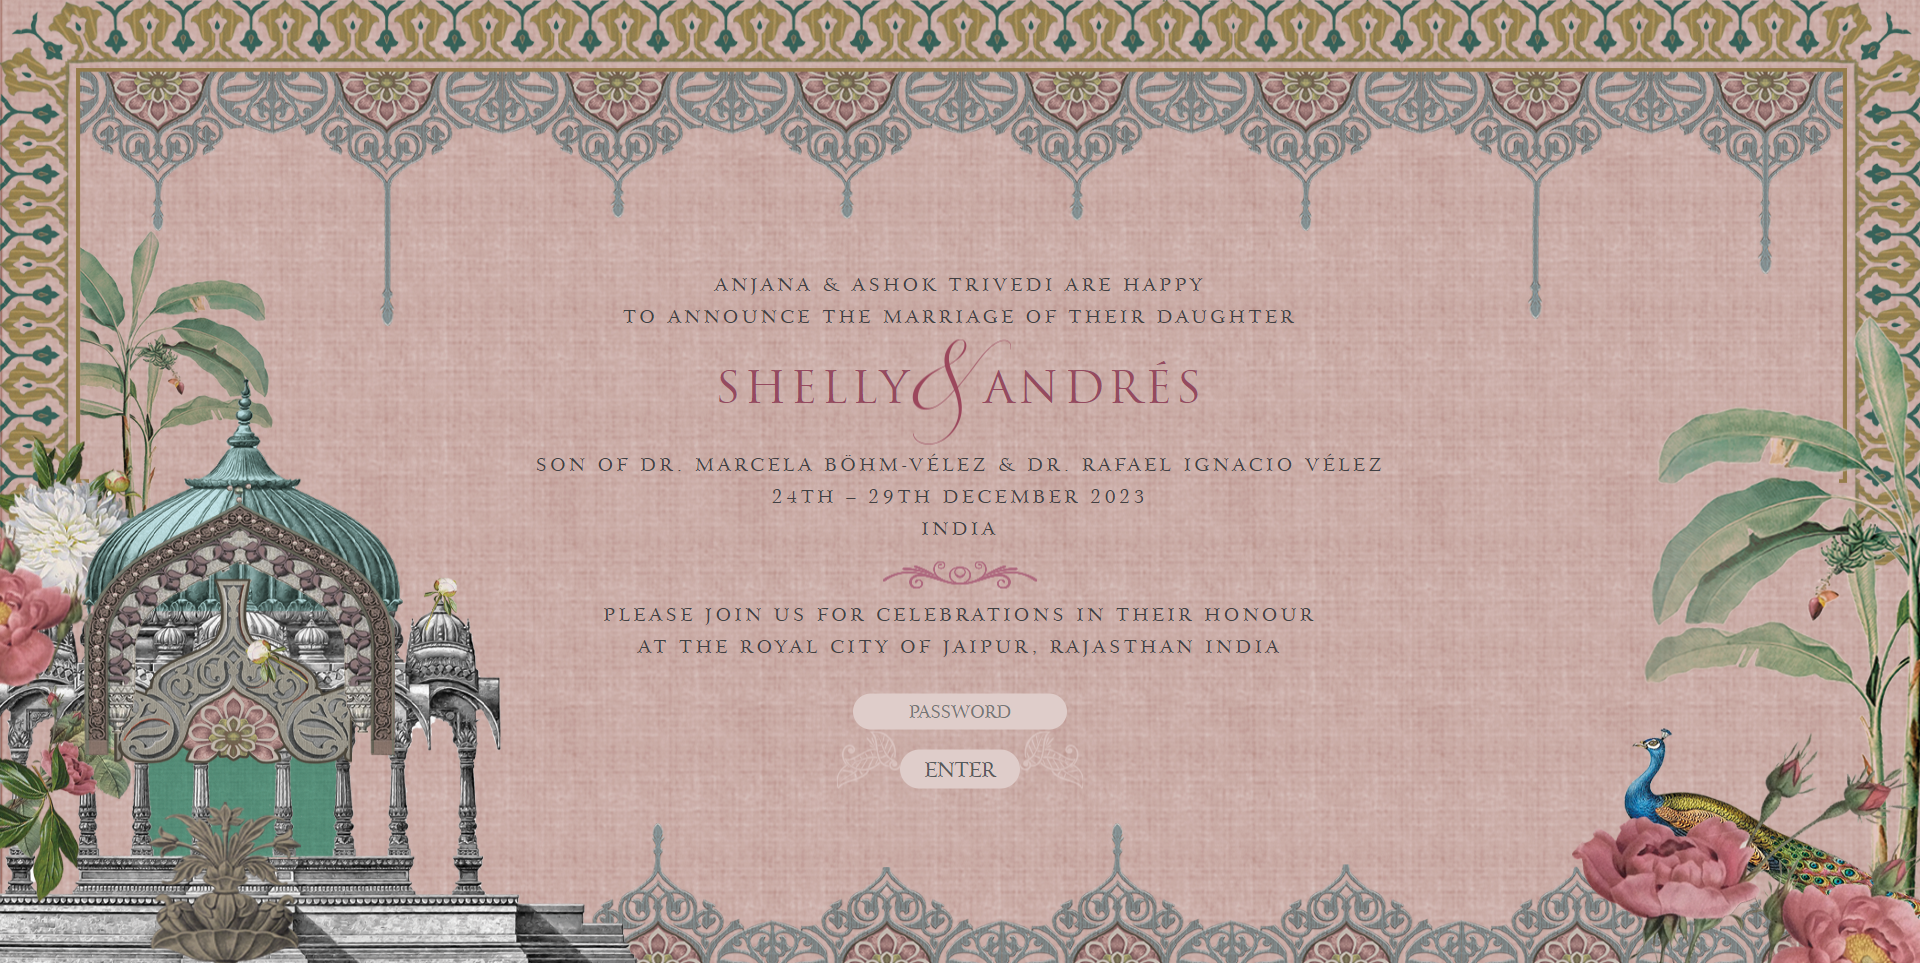 Shelly and Andres website screenshot